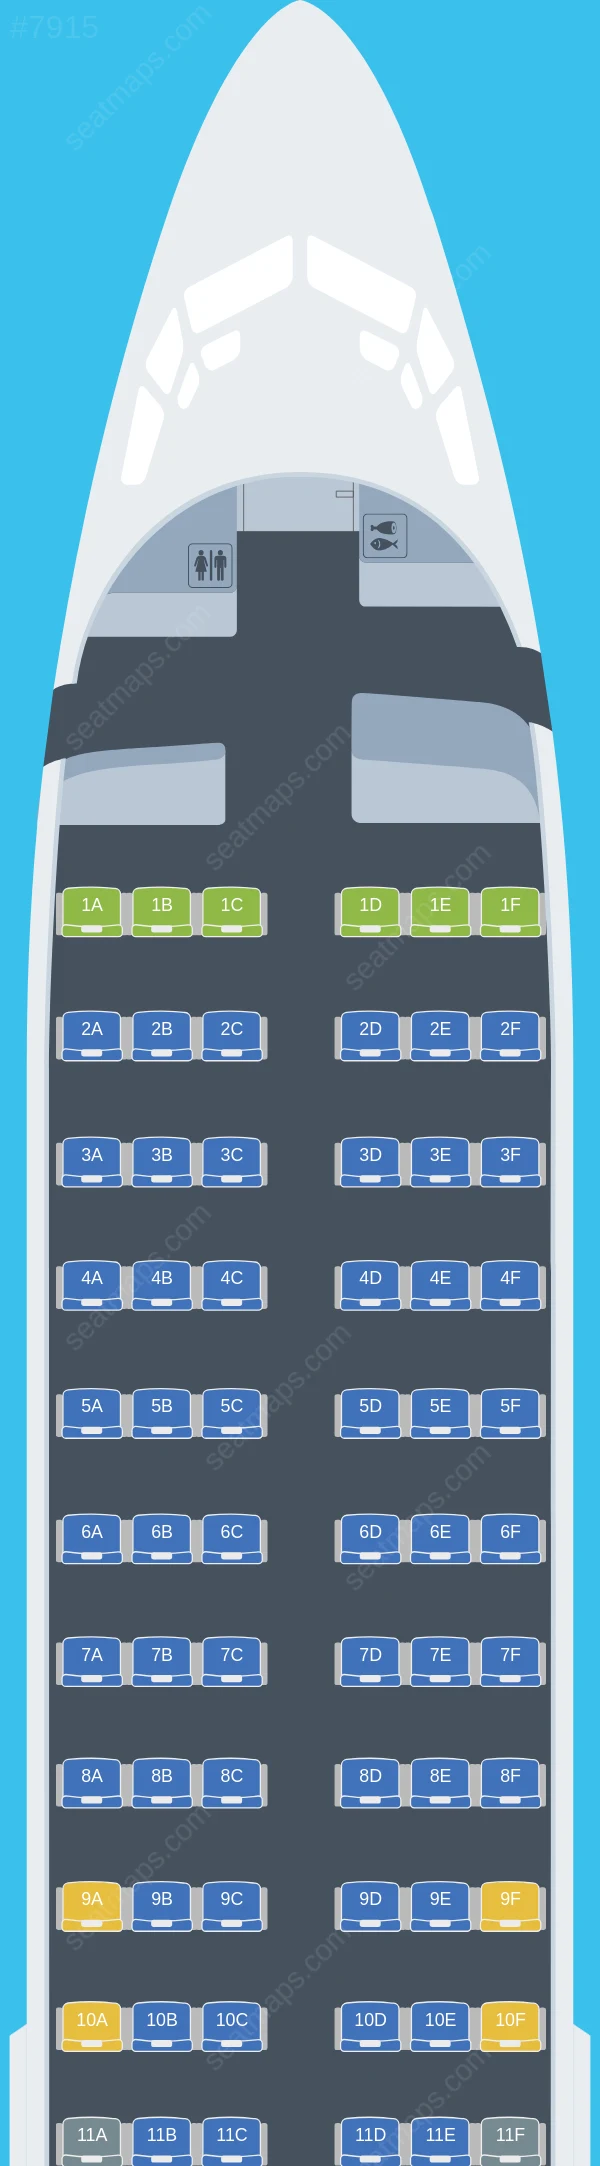 Albawings Boeing 737-400 seatmap preview